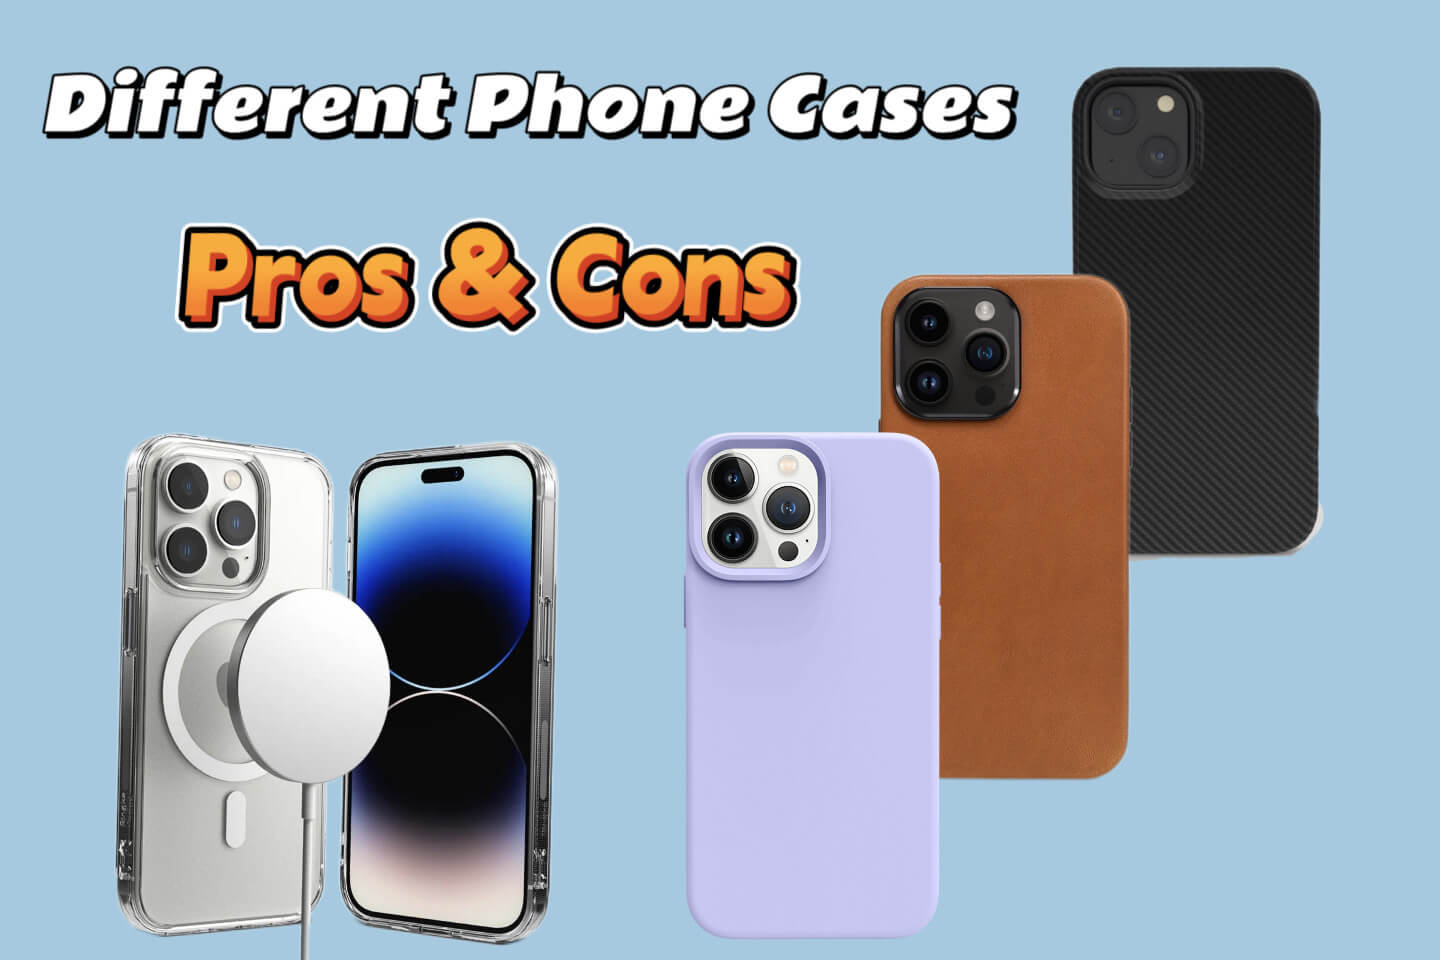 Pros and cons of different phone cases - the ultimate comparison